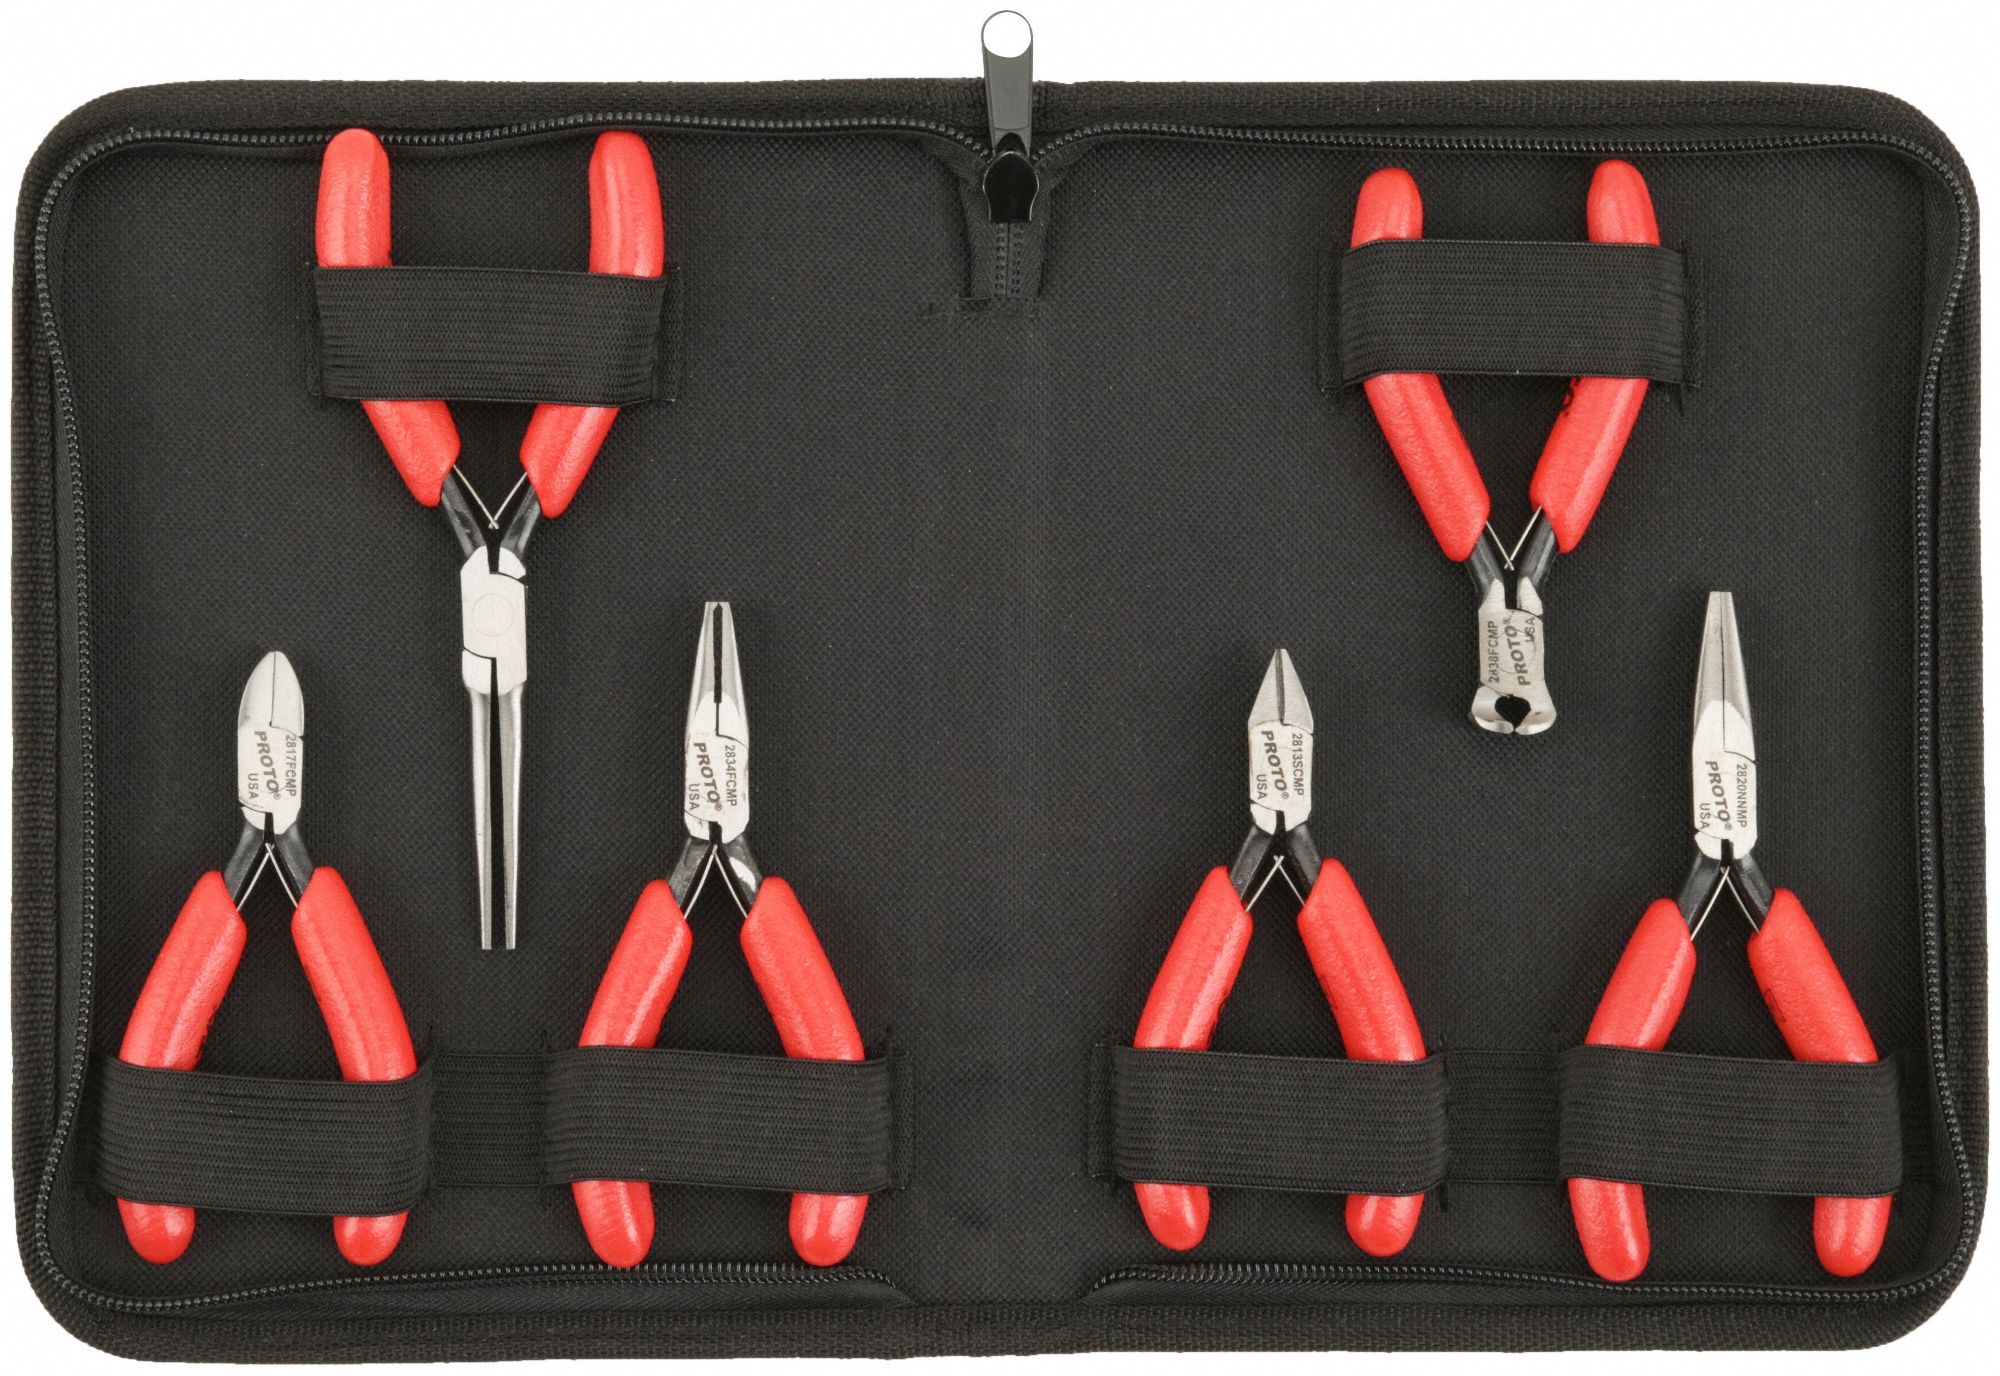 Pliers-Set - ESD-Tool Case with 2 pliers 3201HS22 & 4211HS22 - ESD